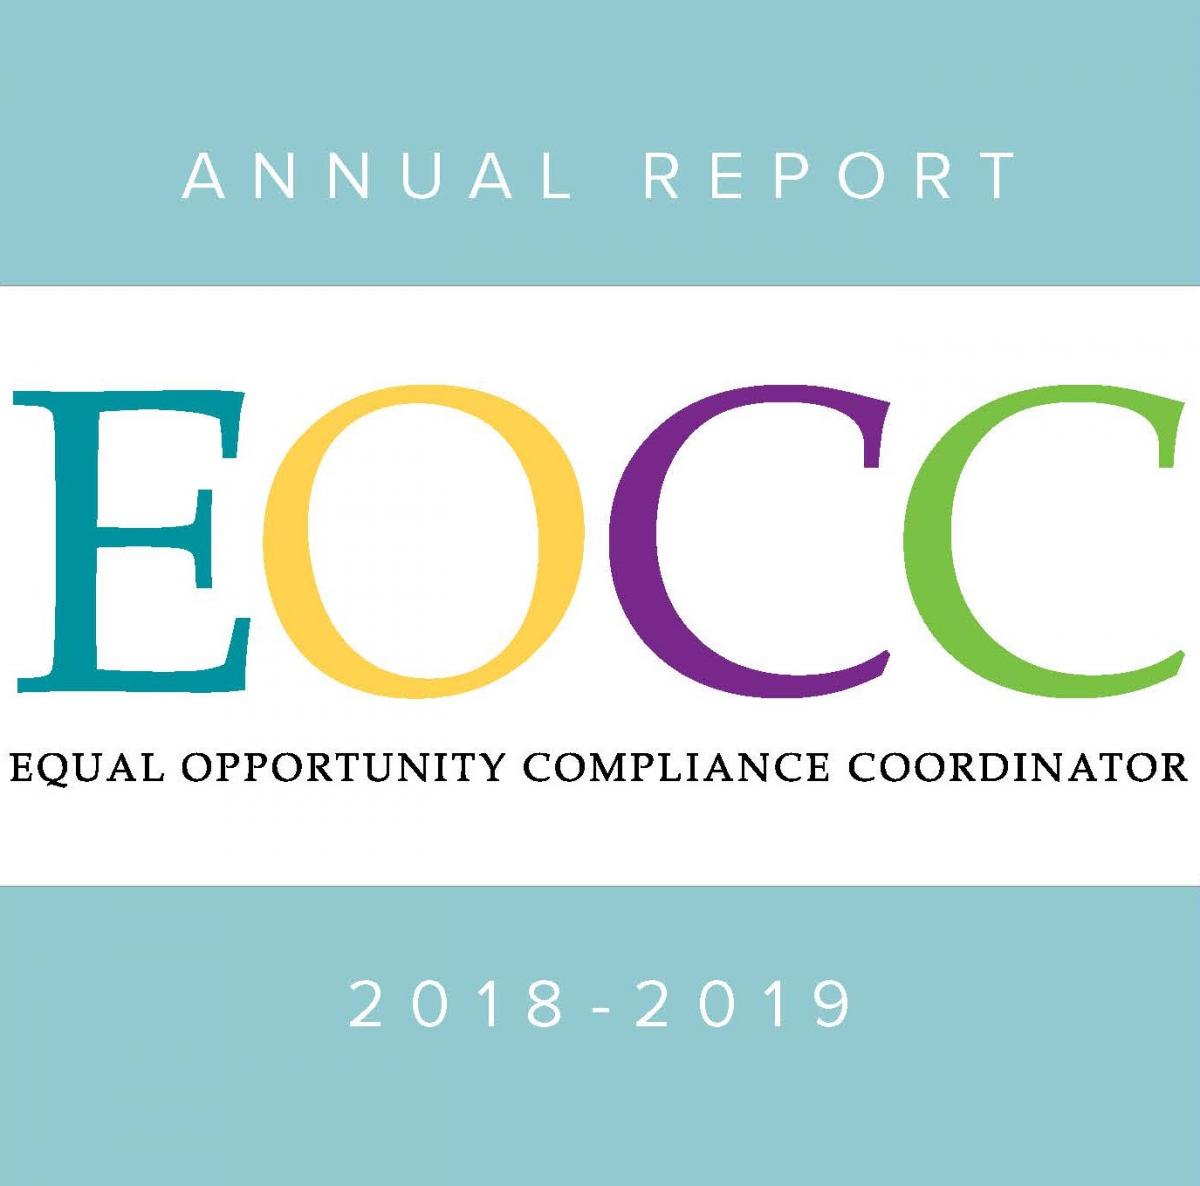 Equal Opportunity Compliance Coordinator (EOCC) Annual Report 2018-2019